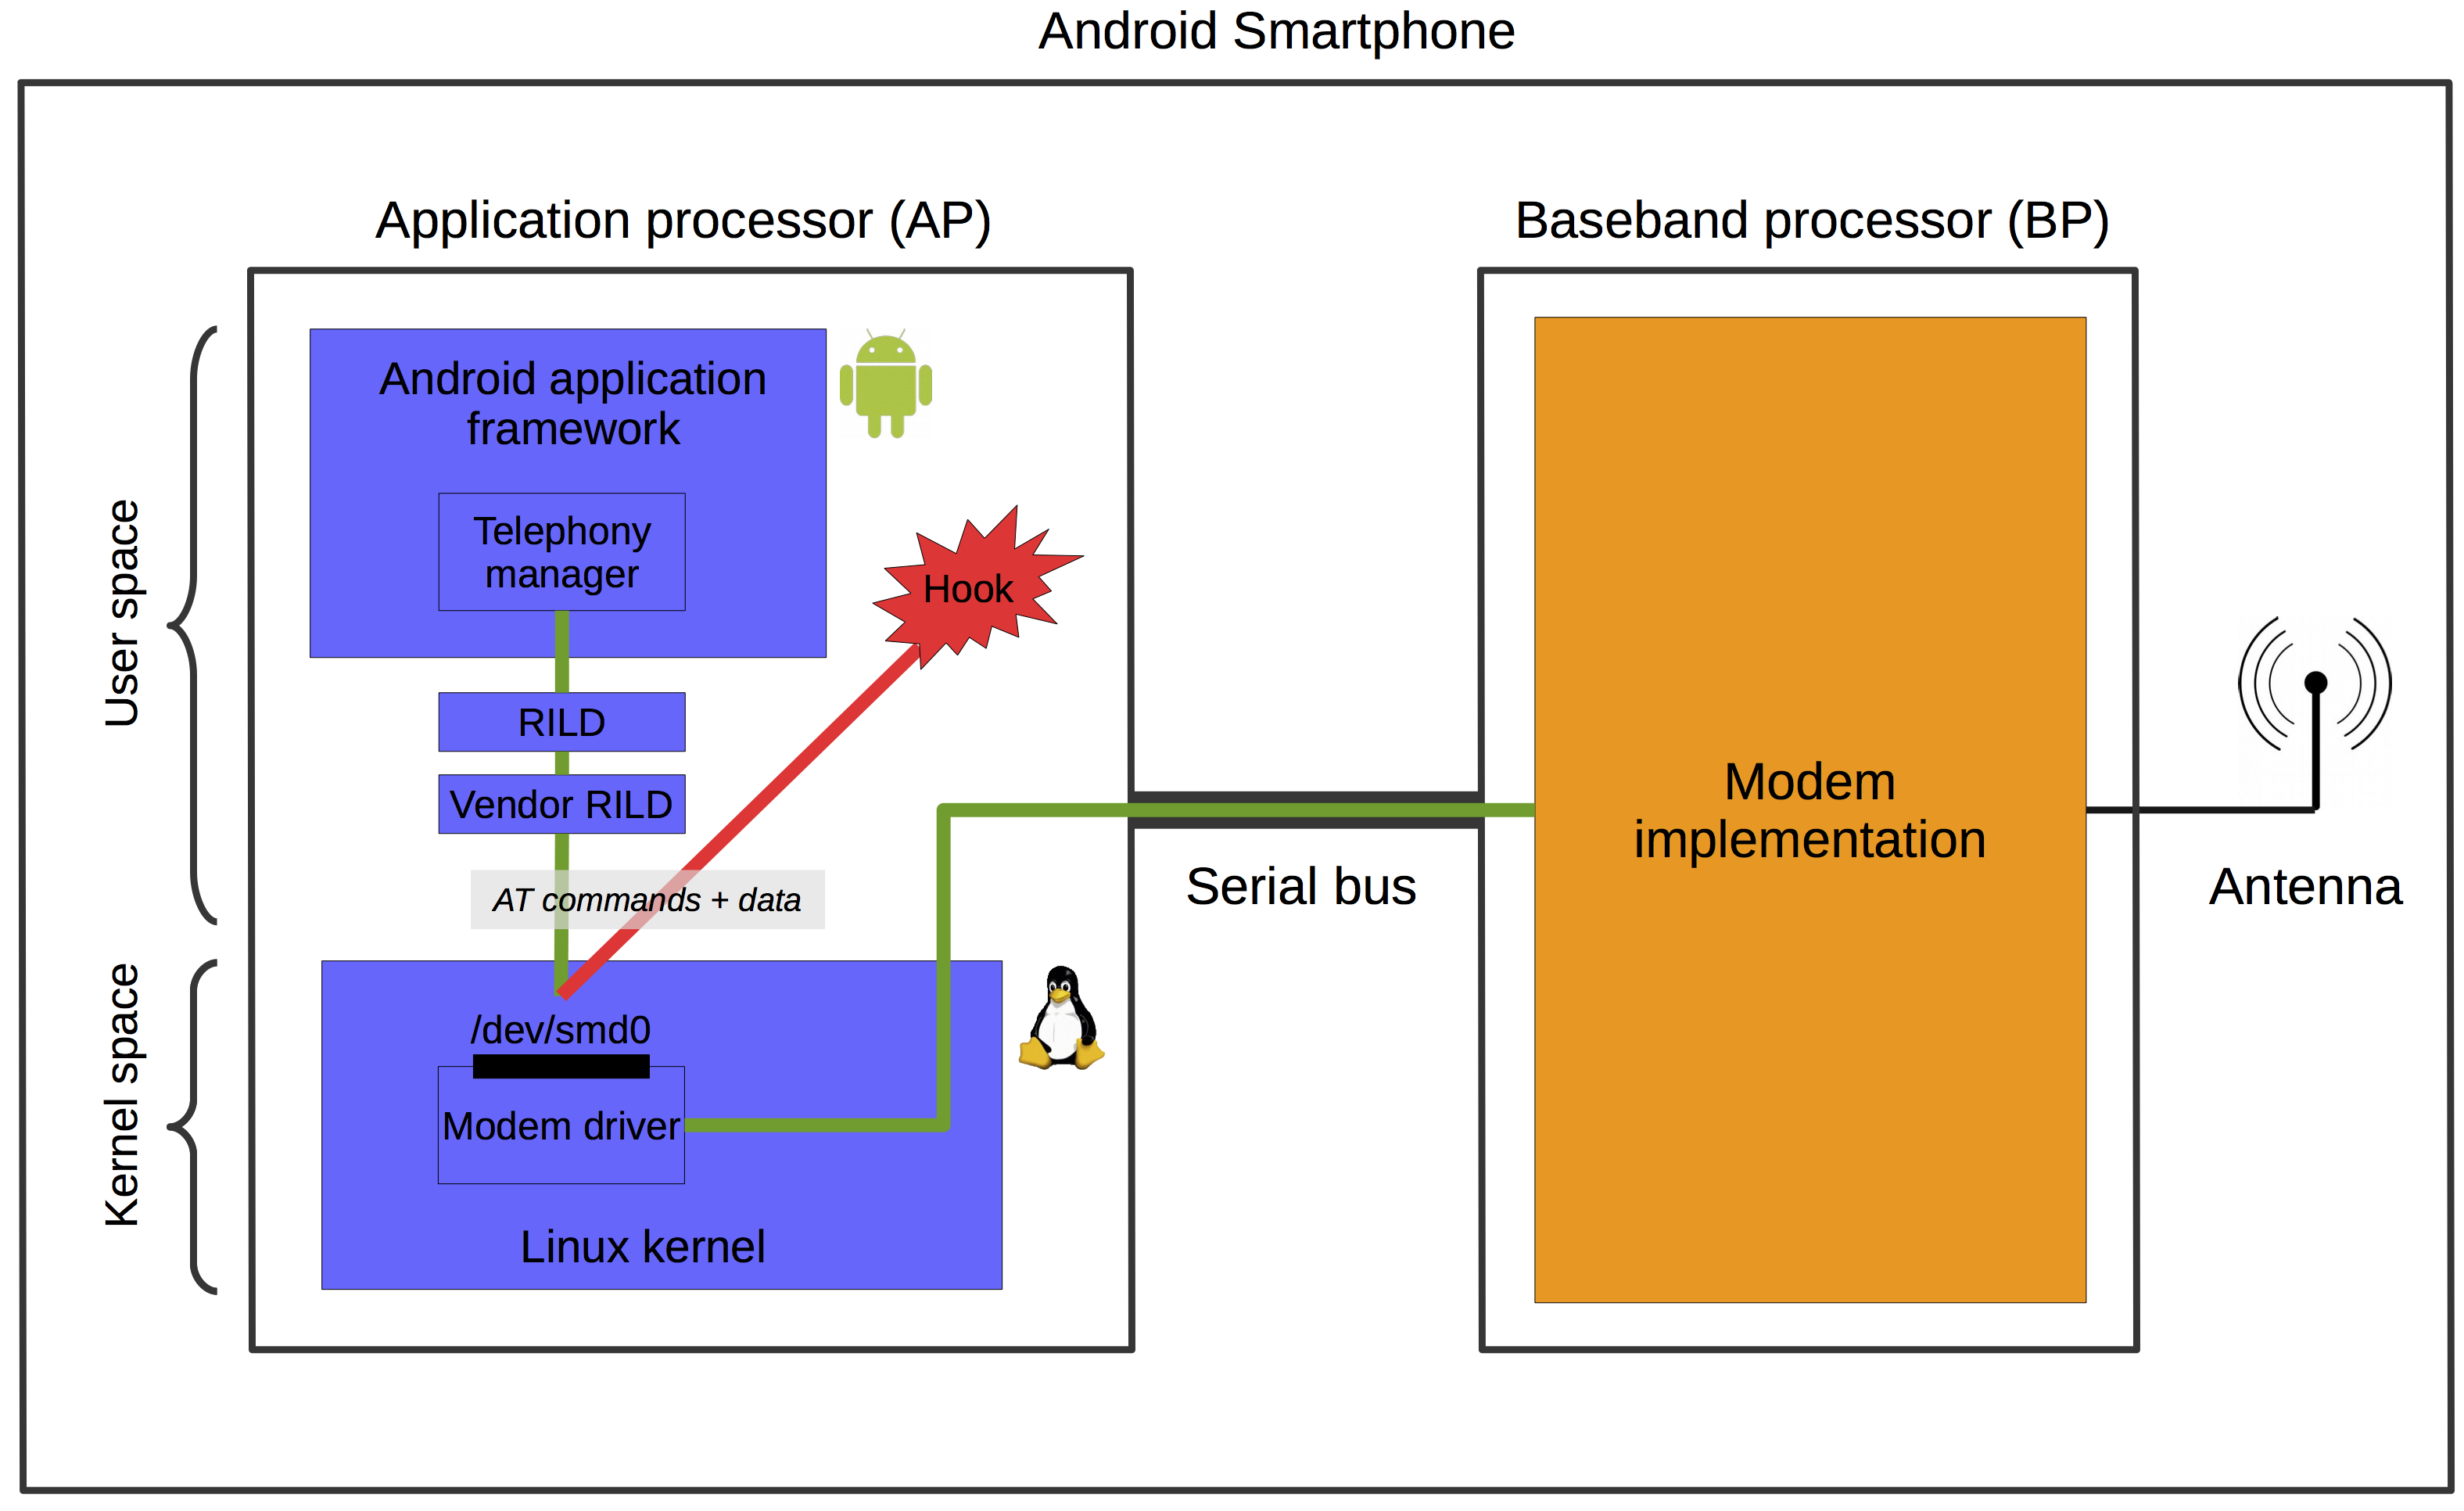 Normal communication between the Android framework and the modem (green), and possible hook for manually communicating with the modem (red).